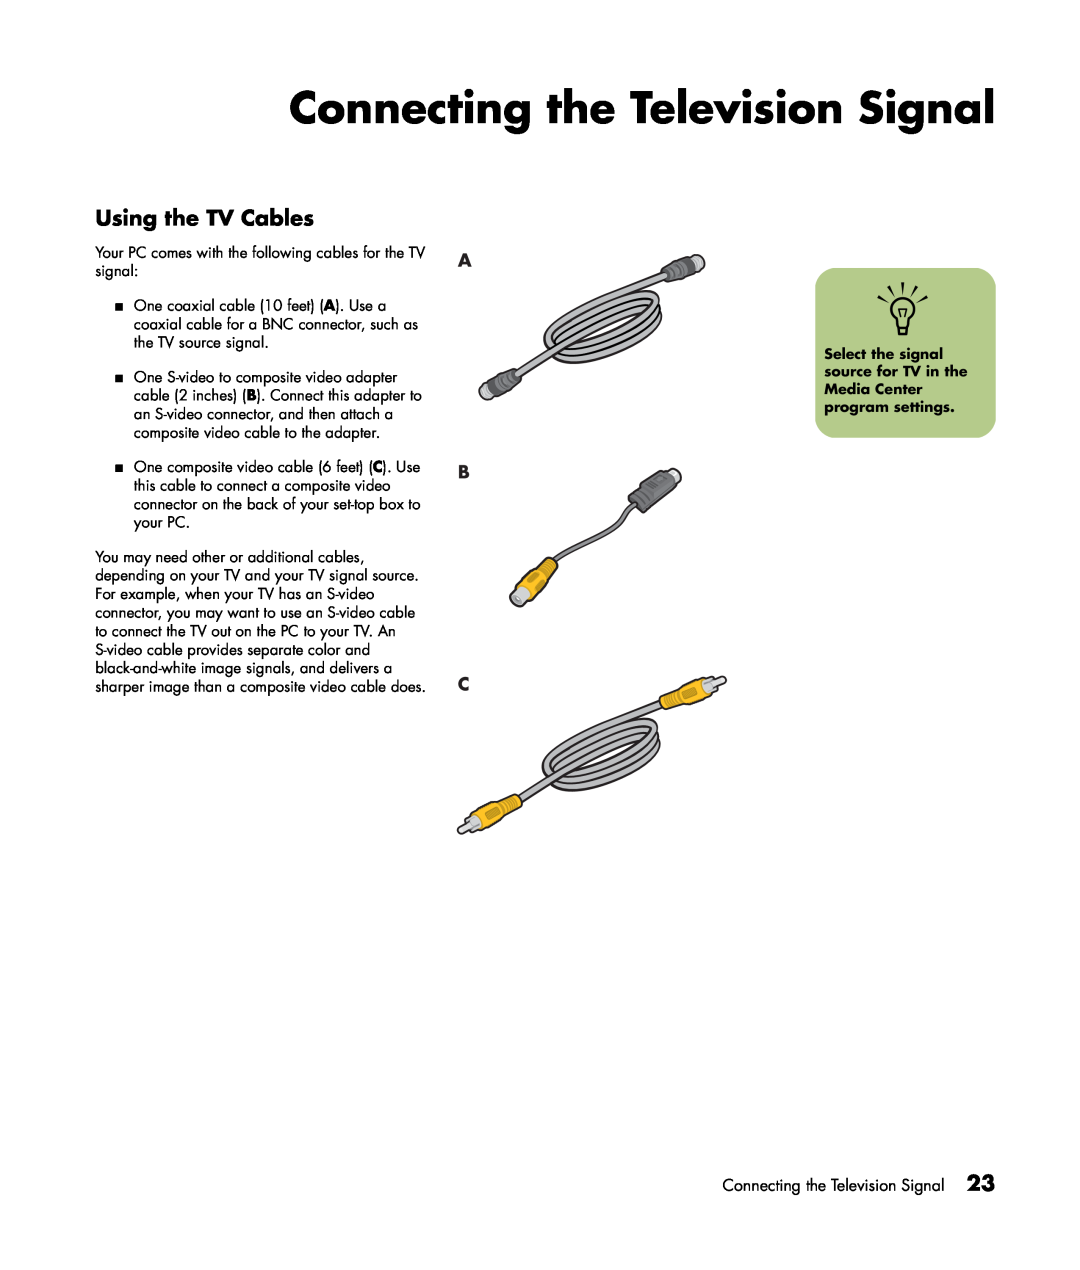 HP m1288a, m1299a, m1050y (PJ720AV), m1050e (PU061AV), m1050y (PU060AV) Connecting the Television Signal, Using the TV Cables 